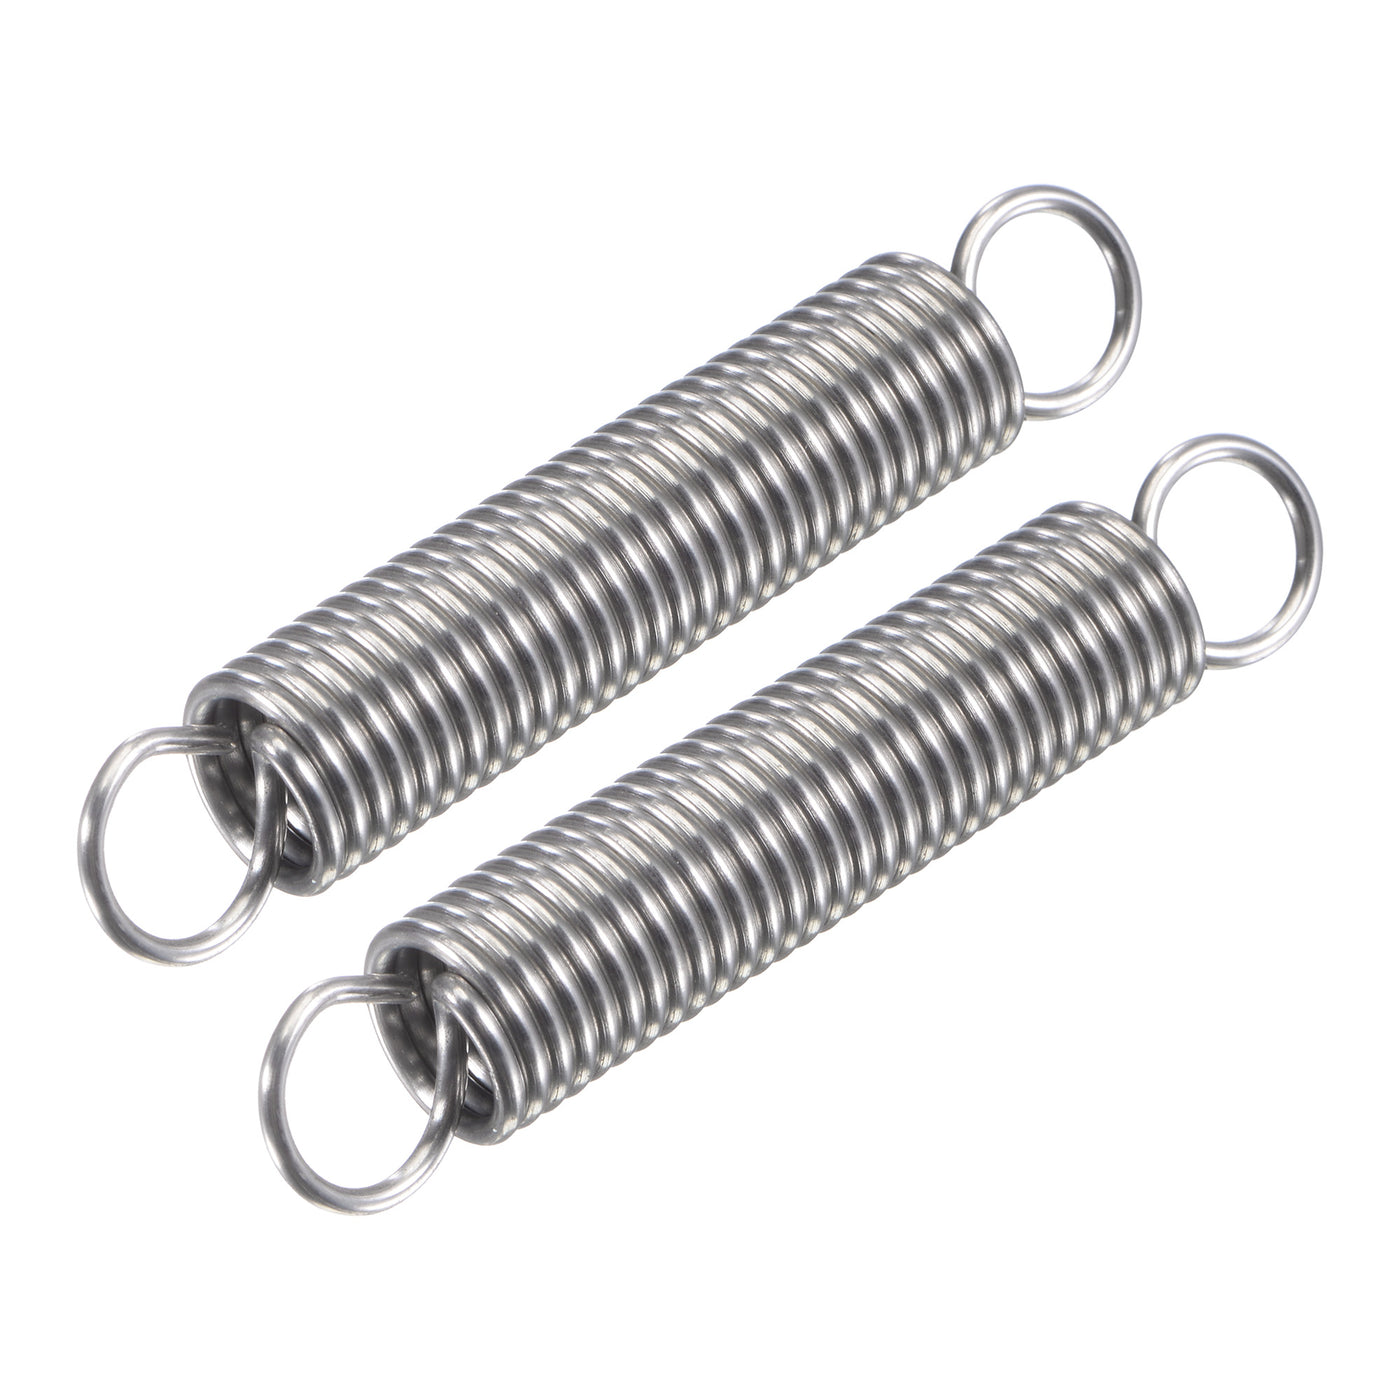 Uxcell Uxcell 1.5mmx12mmx60mm Extended Compression Spring,8.6Lbs Load Capacity,Silver,2pcs